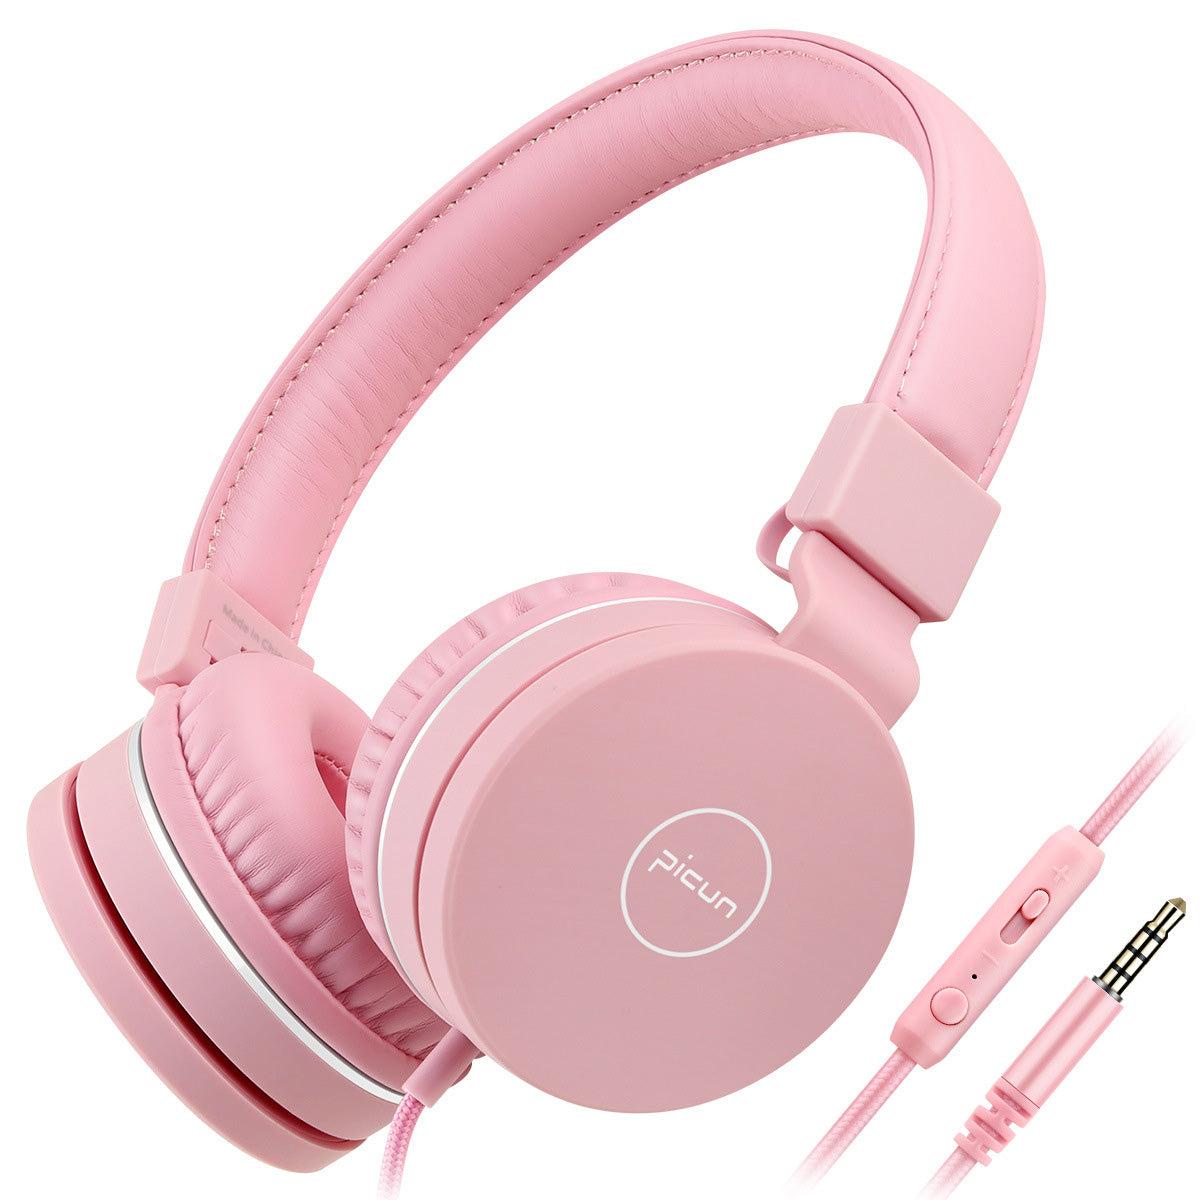 Portable Foldable Kids Childs Headphone Soft 3.5mm Wired Stereo Music Headset with Mic